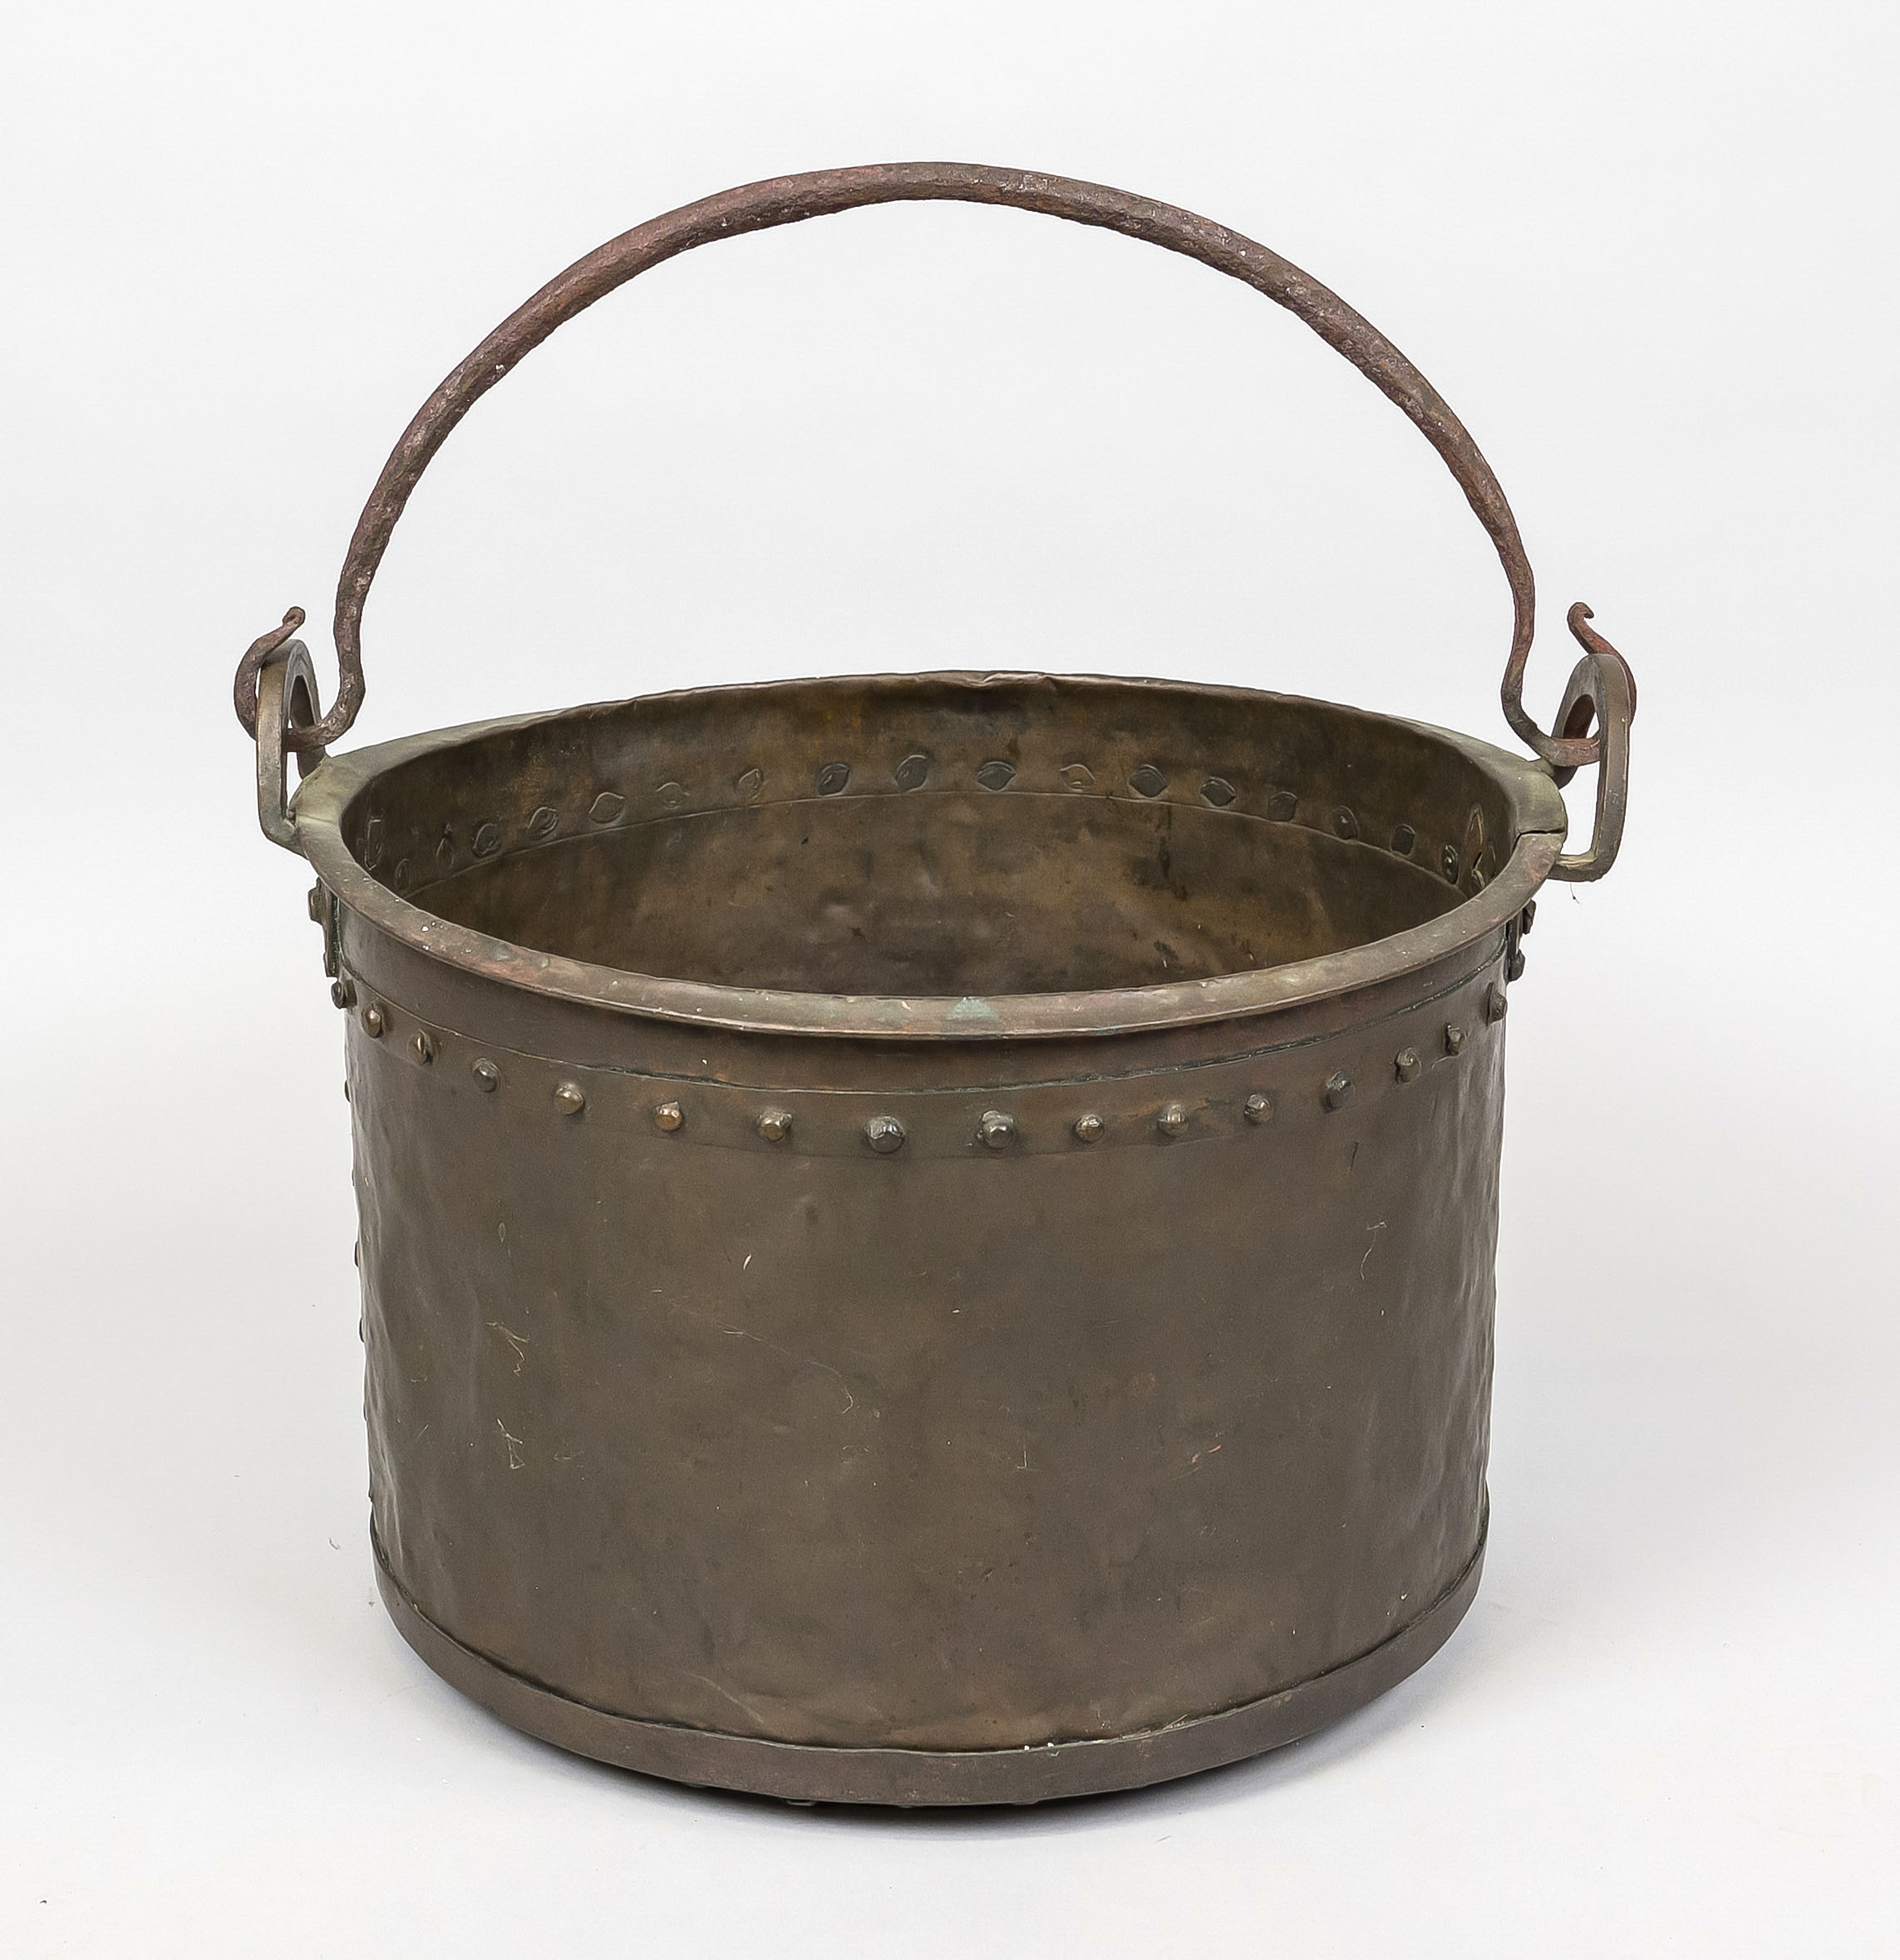 Large cauldron, 18th century, copper. Cylindrical form with studded belt, pivoting iron handle,